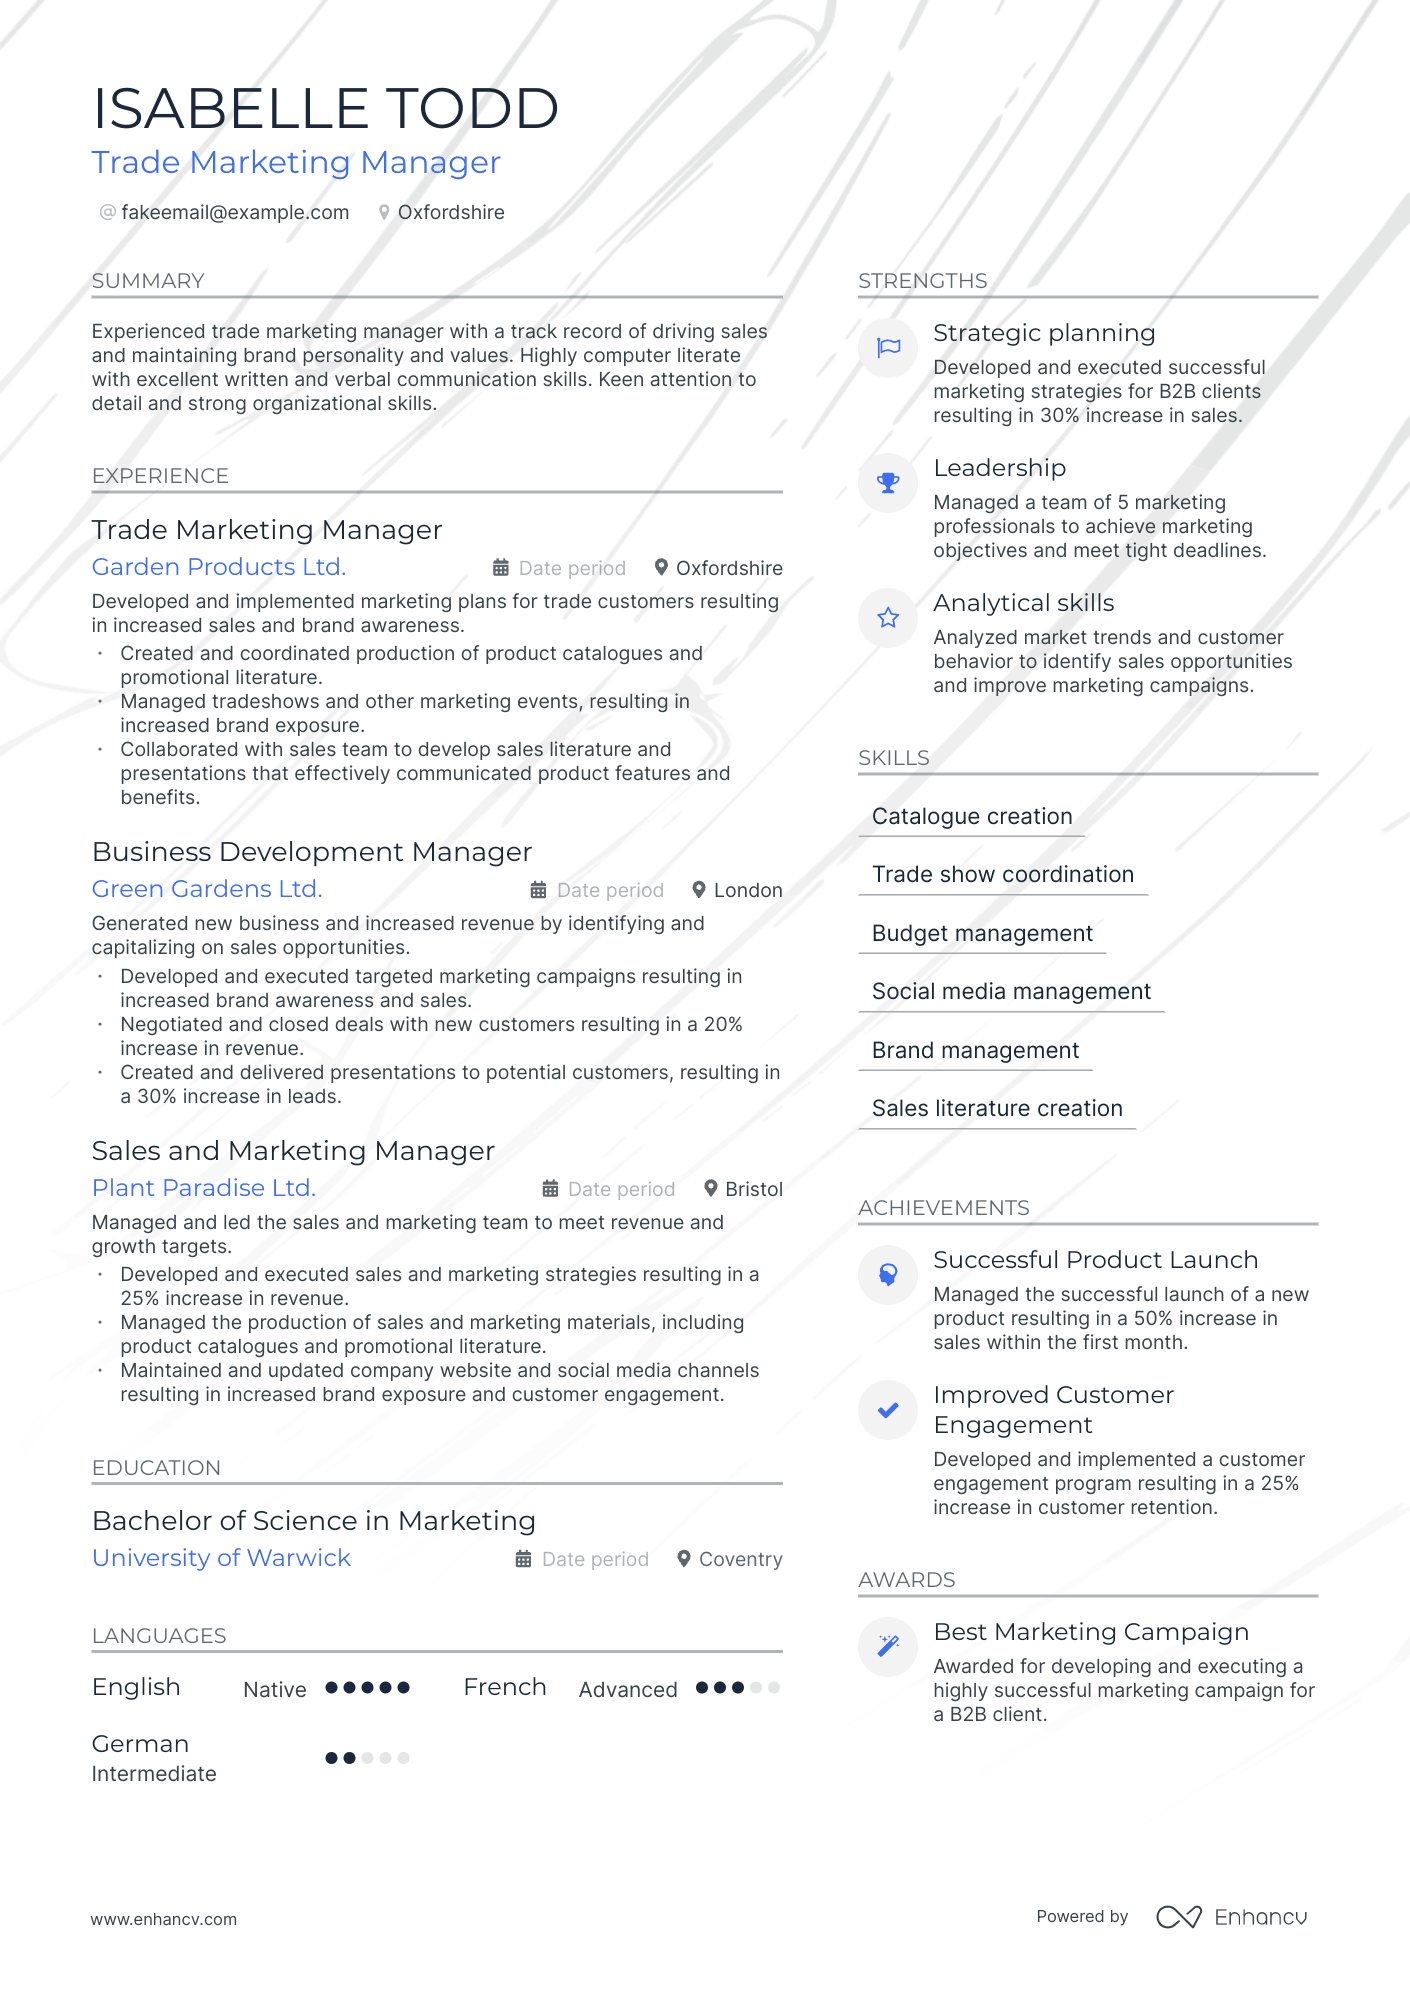 Trade Marketing Manager resume example